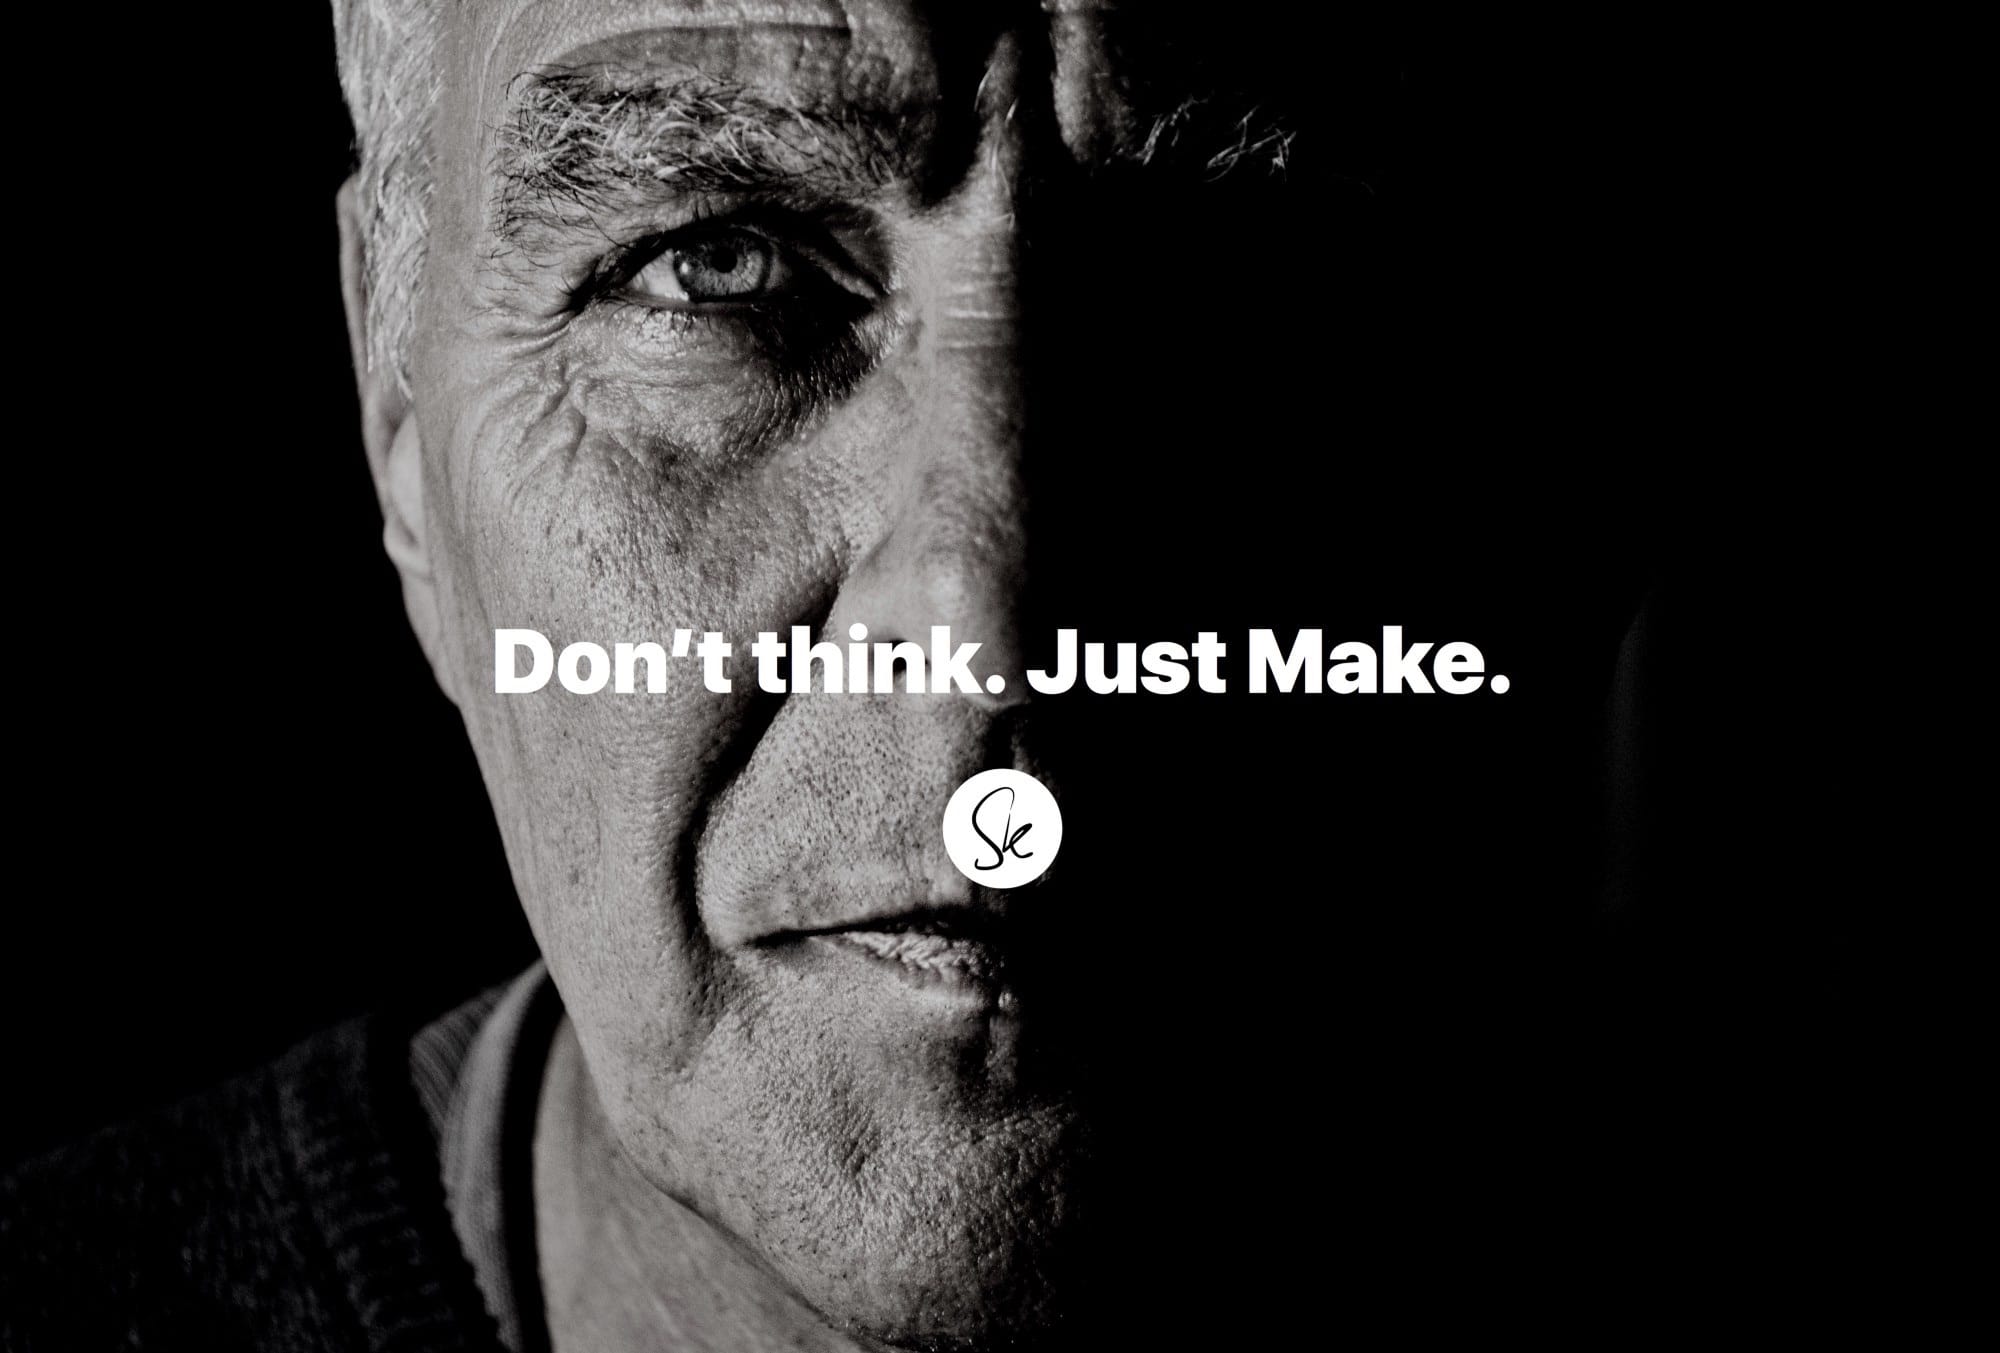 Don't think. Just make.